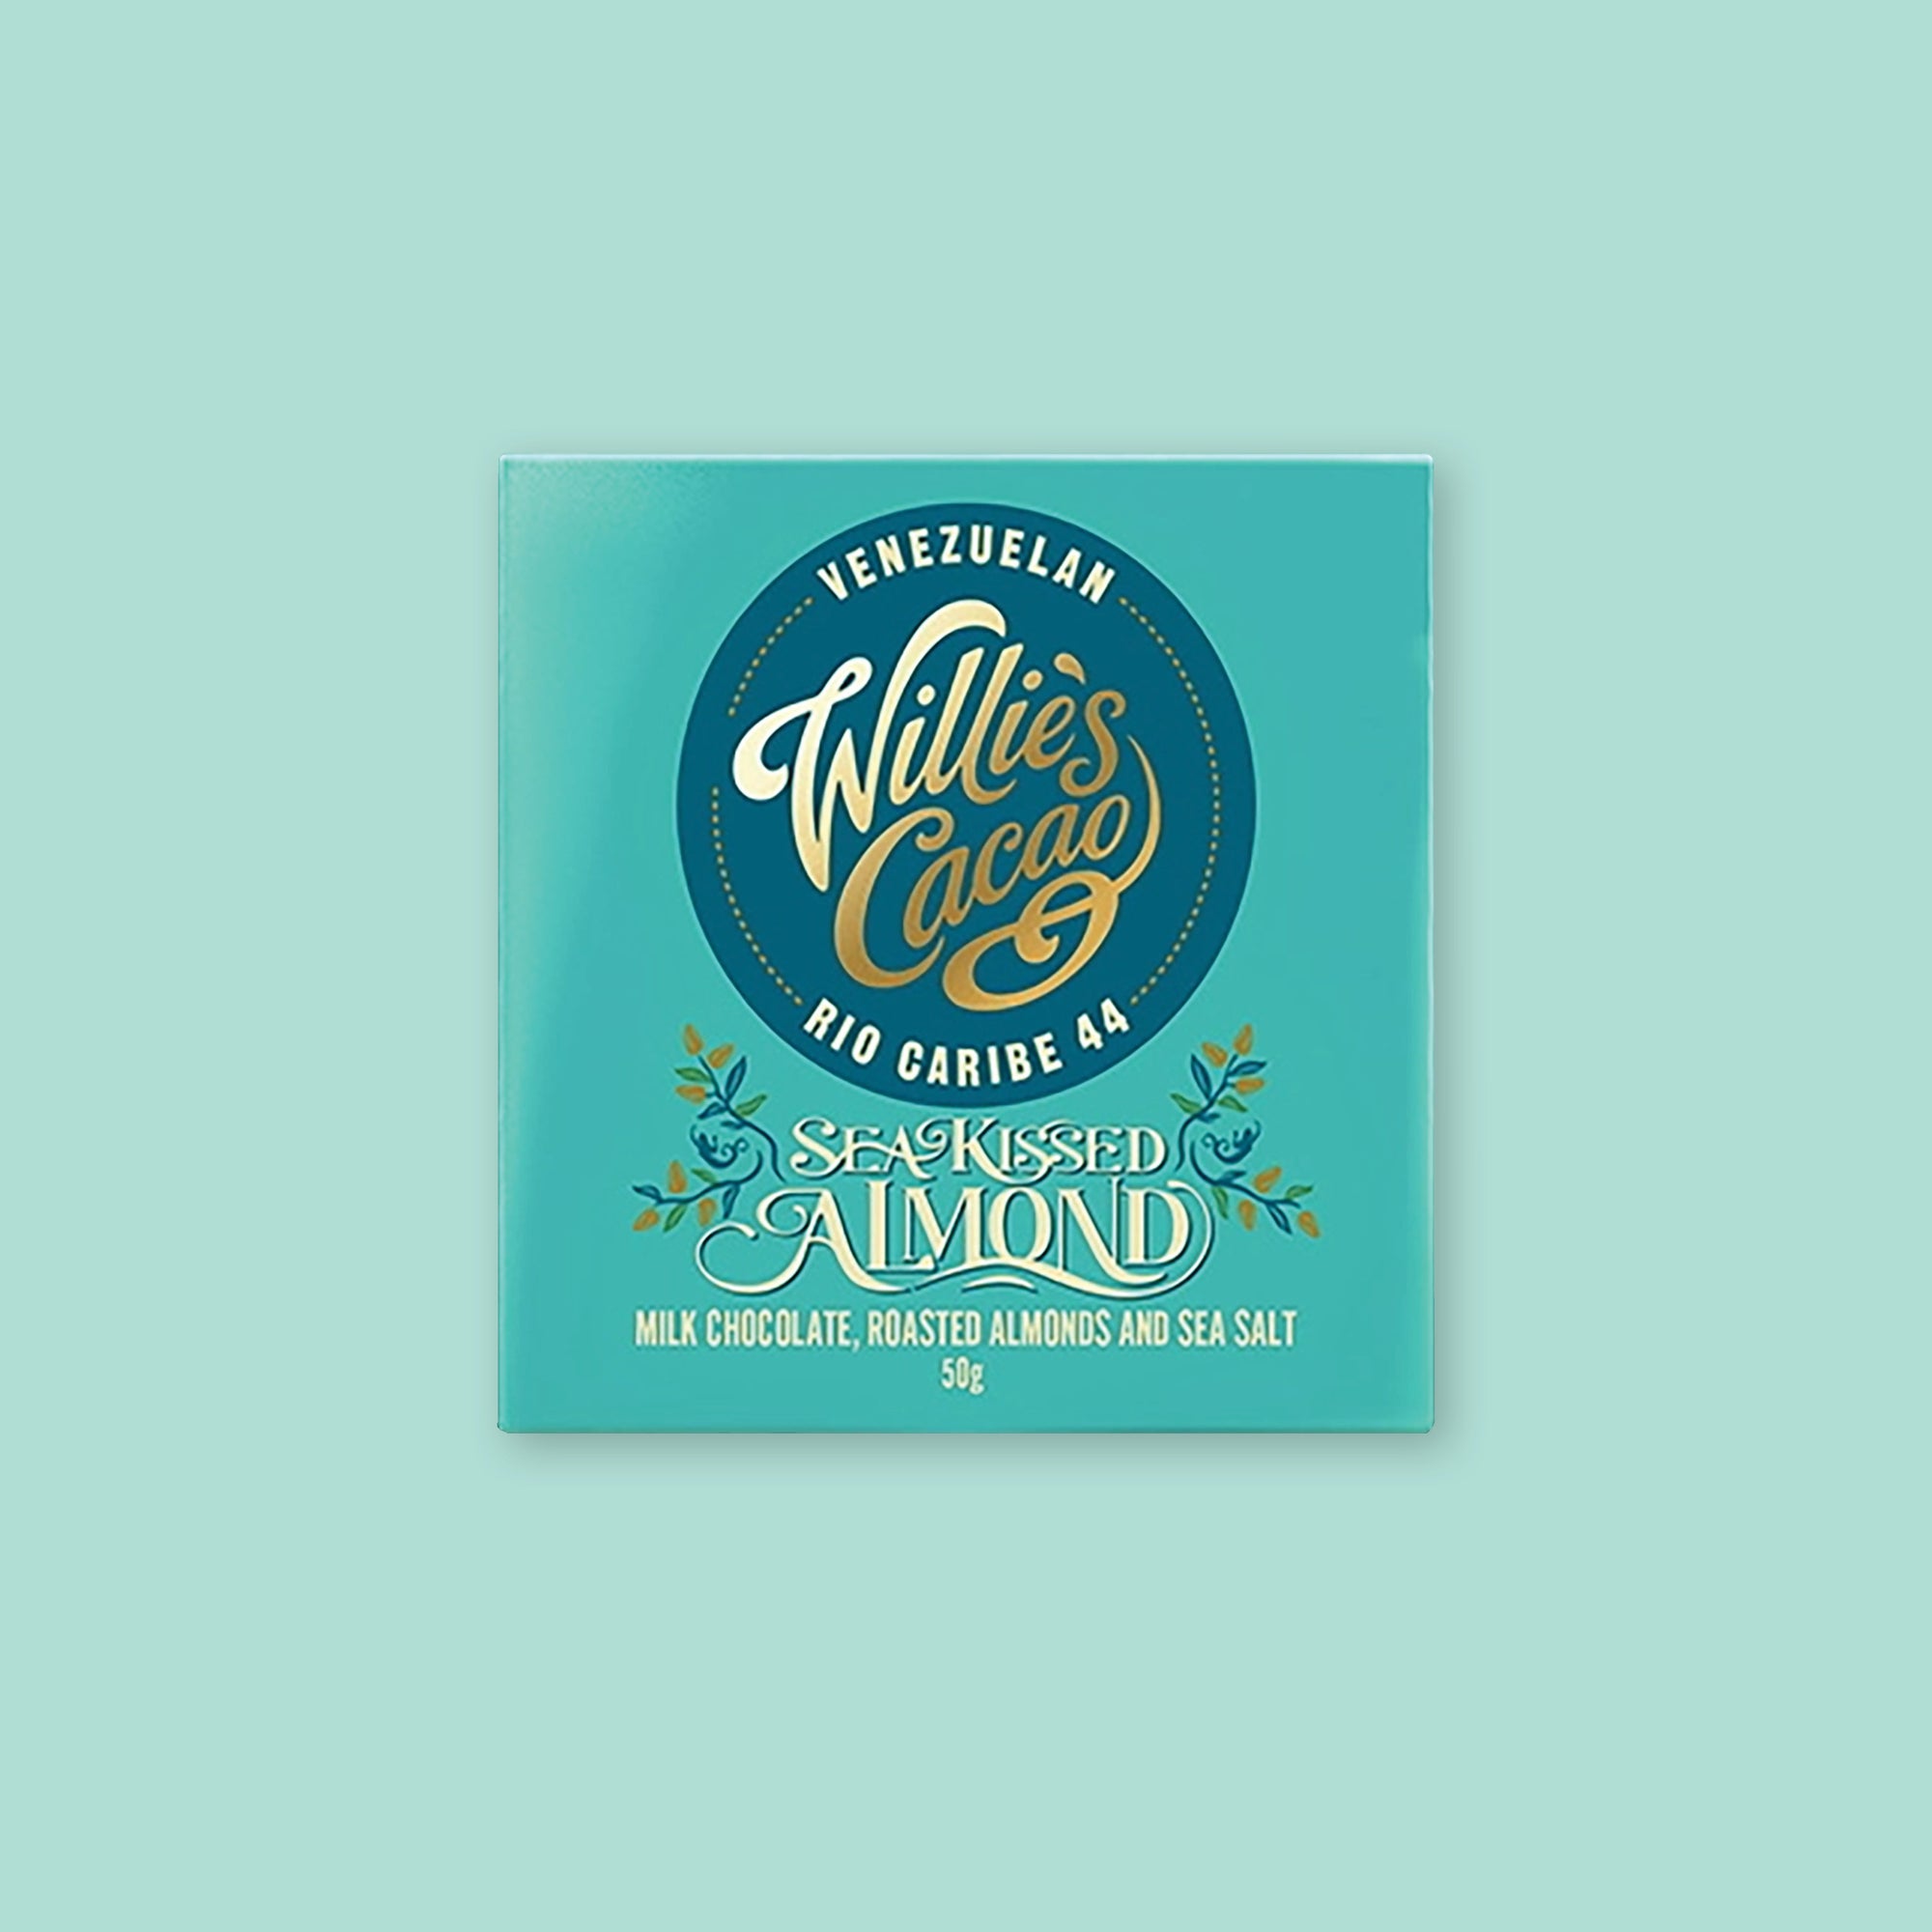 On a mint green background sits tiffany blue package. It has illustrations of almonds and leaves. It has a dark teal circle label on the front. It is Willie's Cacao Cuban Baracoa 44 "MILK CHOCOLATE, ROASTED ALMONDS AND SEA SALT." 50g